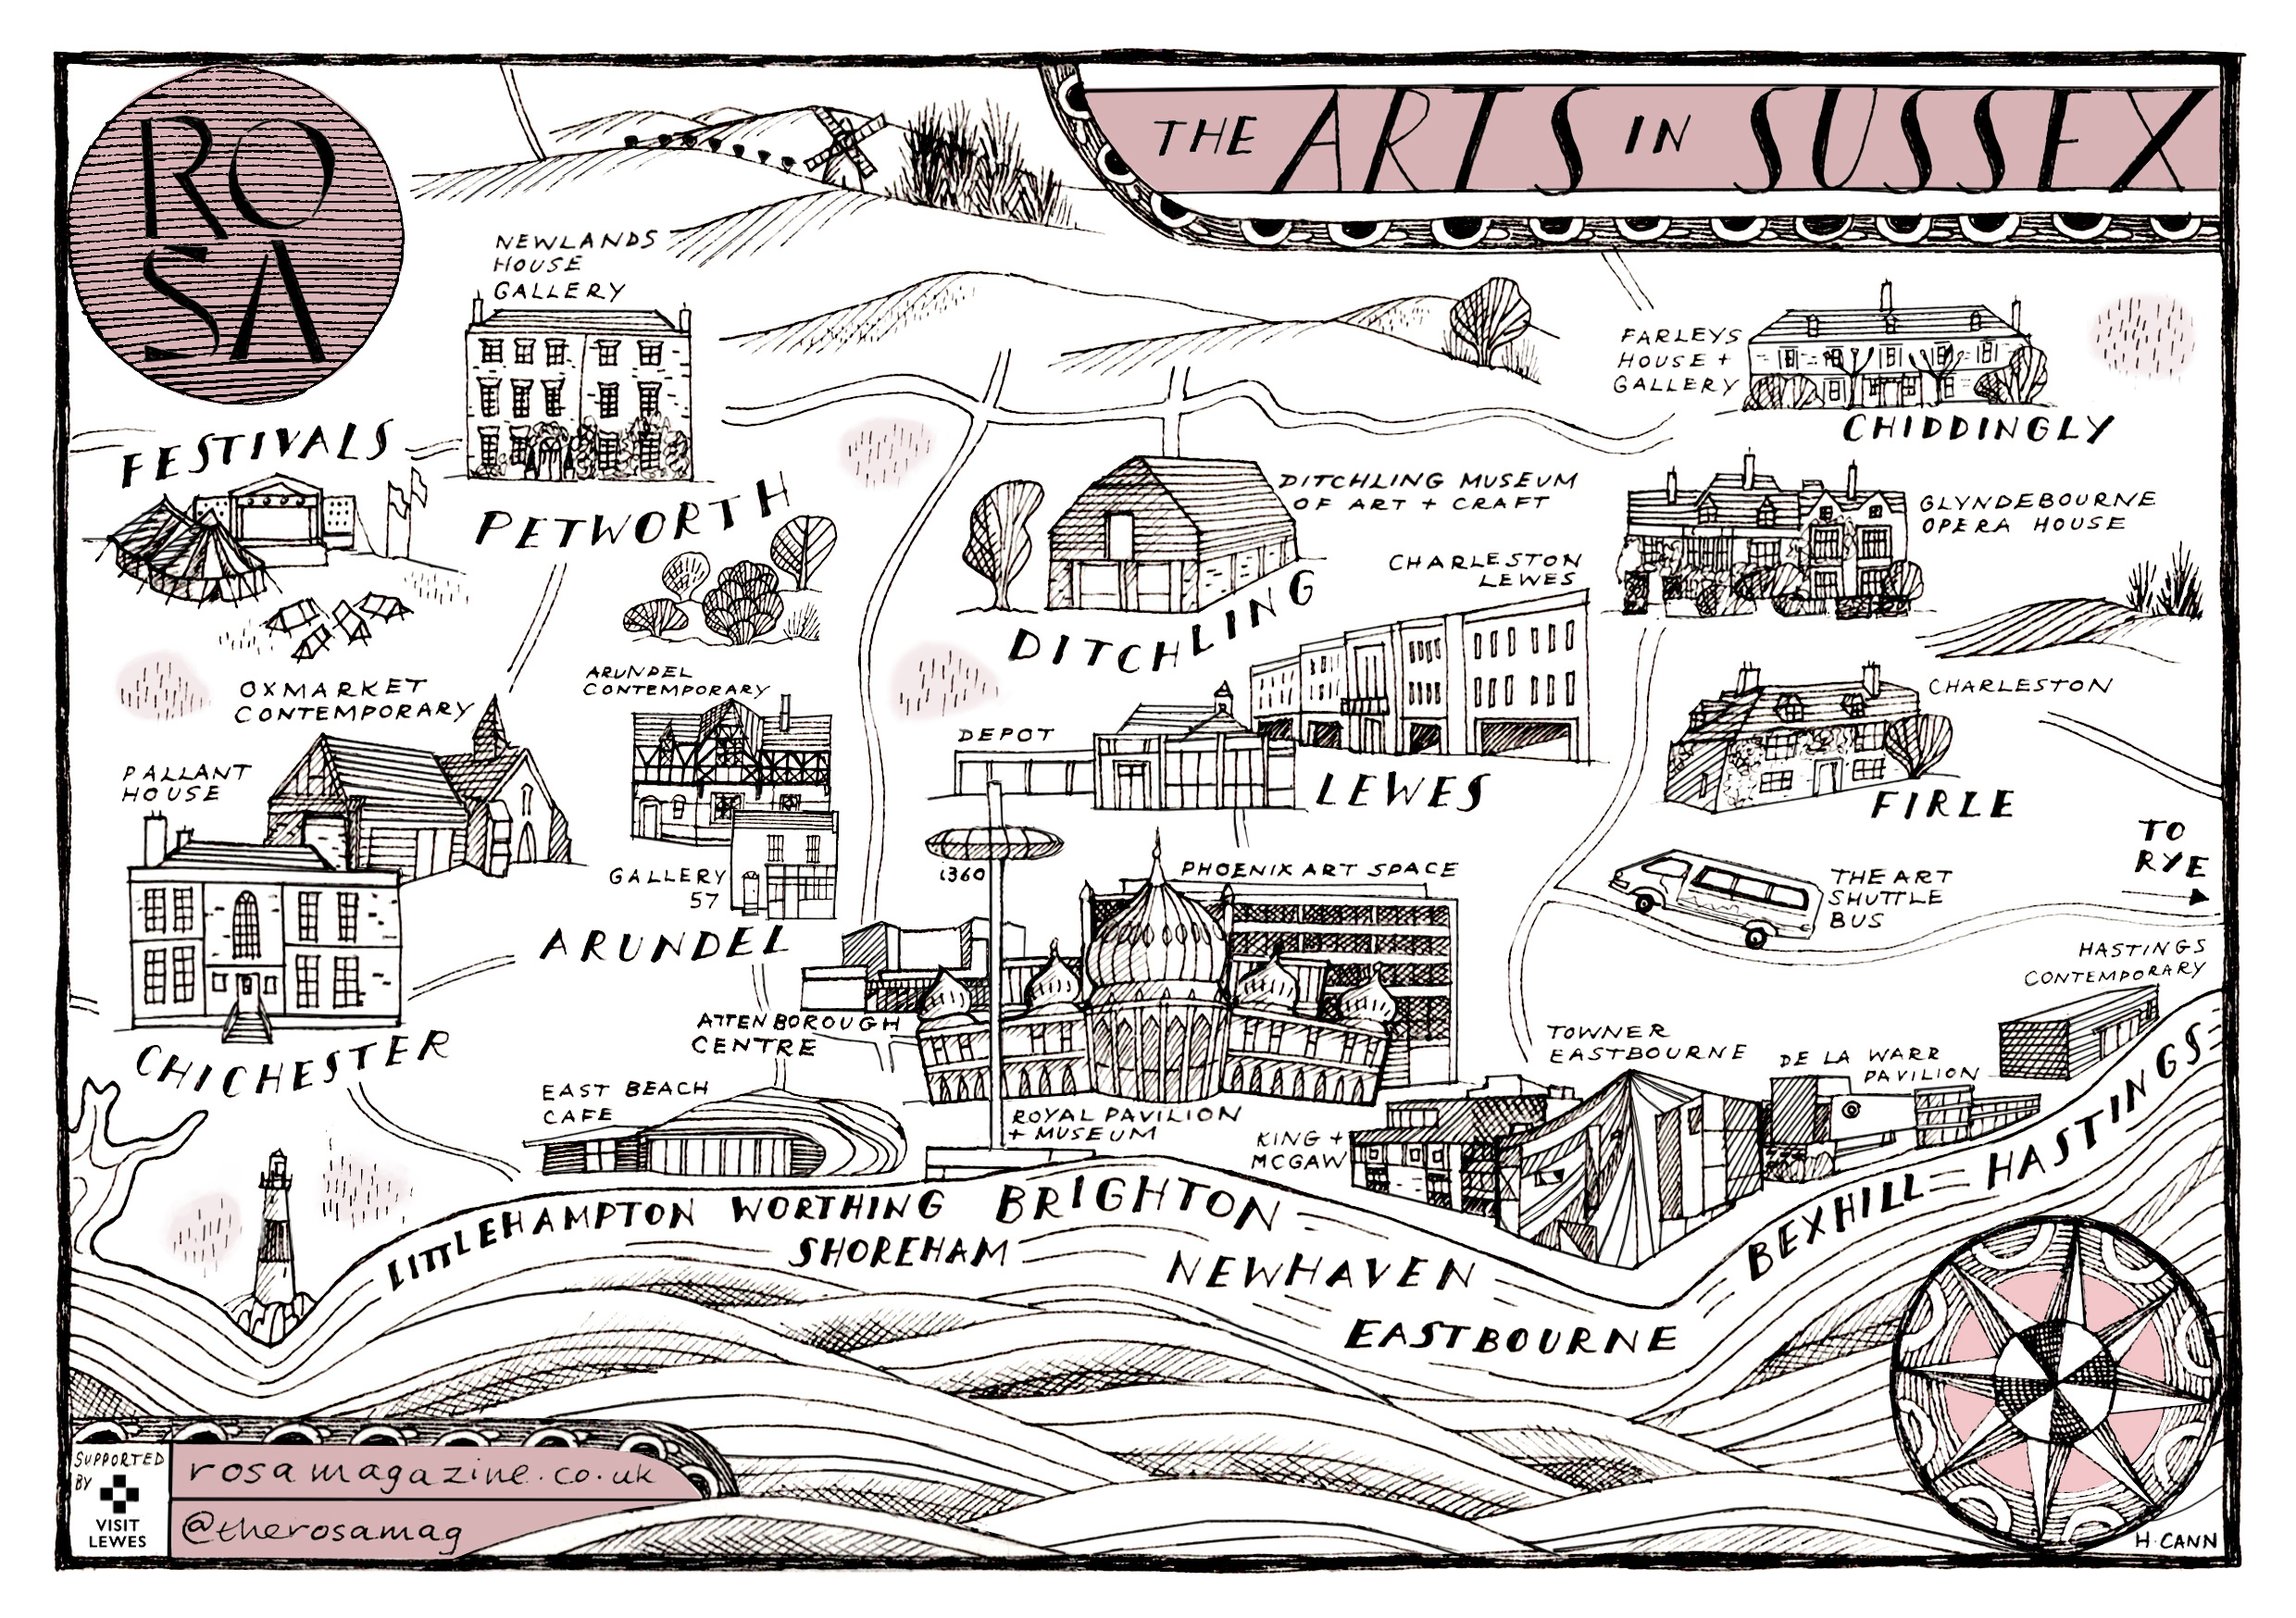 ROSA’s new Sussex Art Map by Helen Cann. Courtesy of ROSA Magazine.